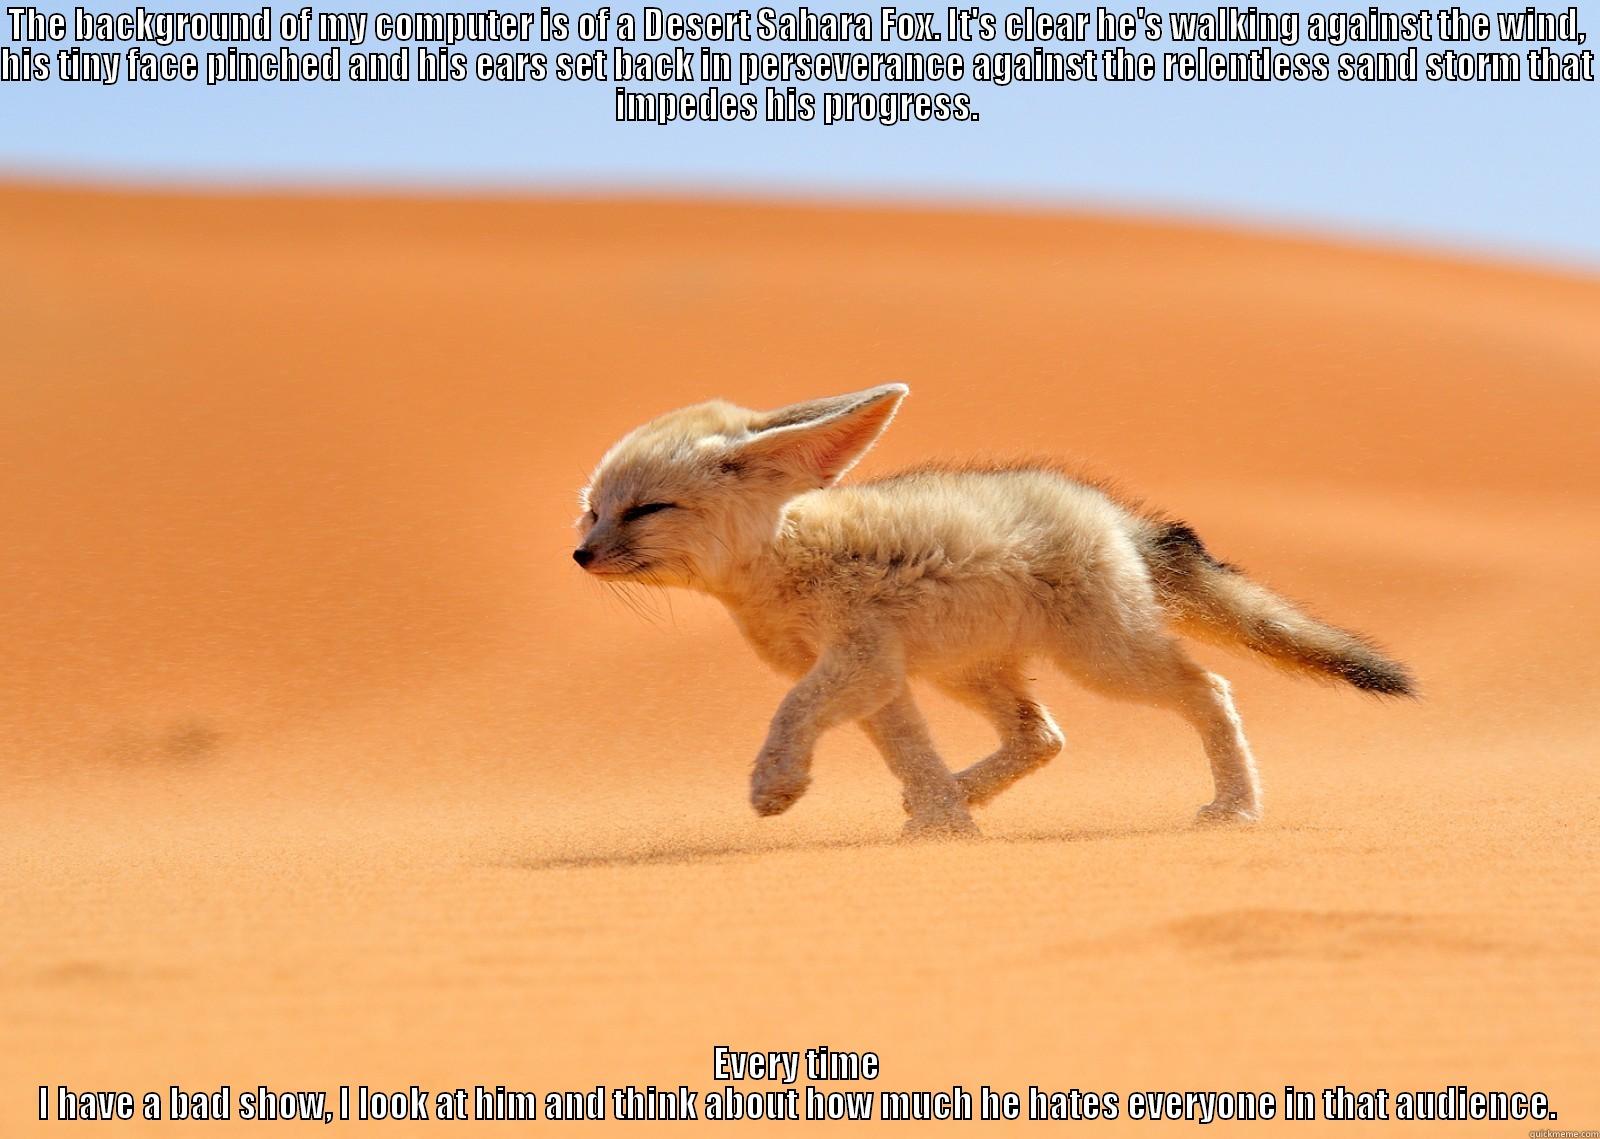 THE BACKGROUND OF MY COMPUTER IS OF A DESERT SAHARA FOX. IT'S CLEAR HE'S WALKING AGAINST THE WIND, HIS TINY FACE PINCHED AND HIS EARS SET BACK IN PERSEVERANCE AGAINST THE RELENTLESS SAND STORM THAT IMPEDES HIS PROGRESS. EVERY TIME I HAVE A BAD SHOW, I LOOK AT HIM AND THINK ABOUT HOW MUCH HE HATES EVERYONE IN THAT AUDIENCE. Misc